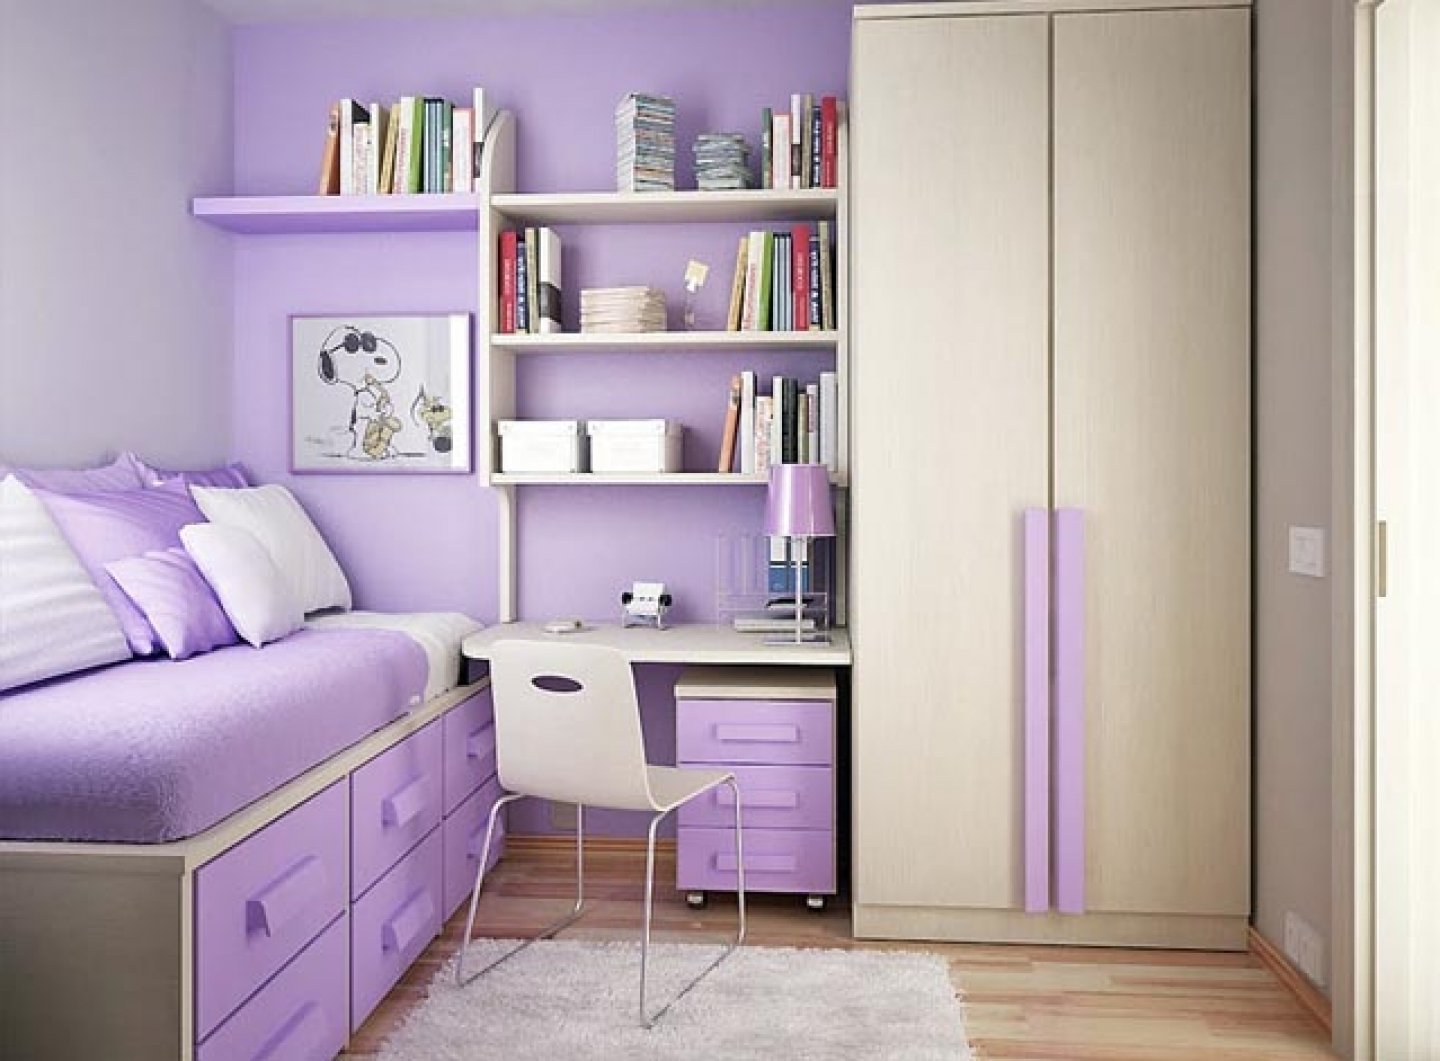 10 Most Recommended Small Bedroom Ideas For Teenage Girls teenage girl bedroom ideas for small rooms unique design purple 2023